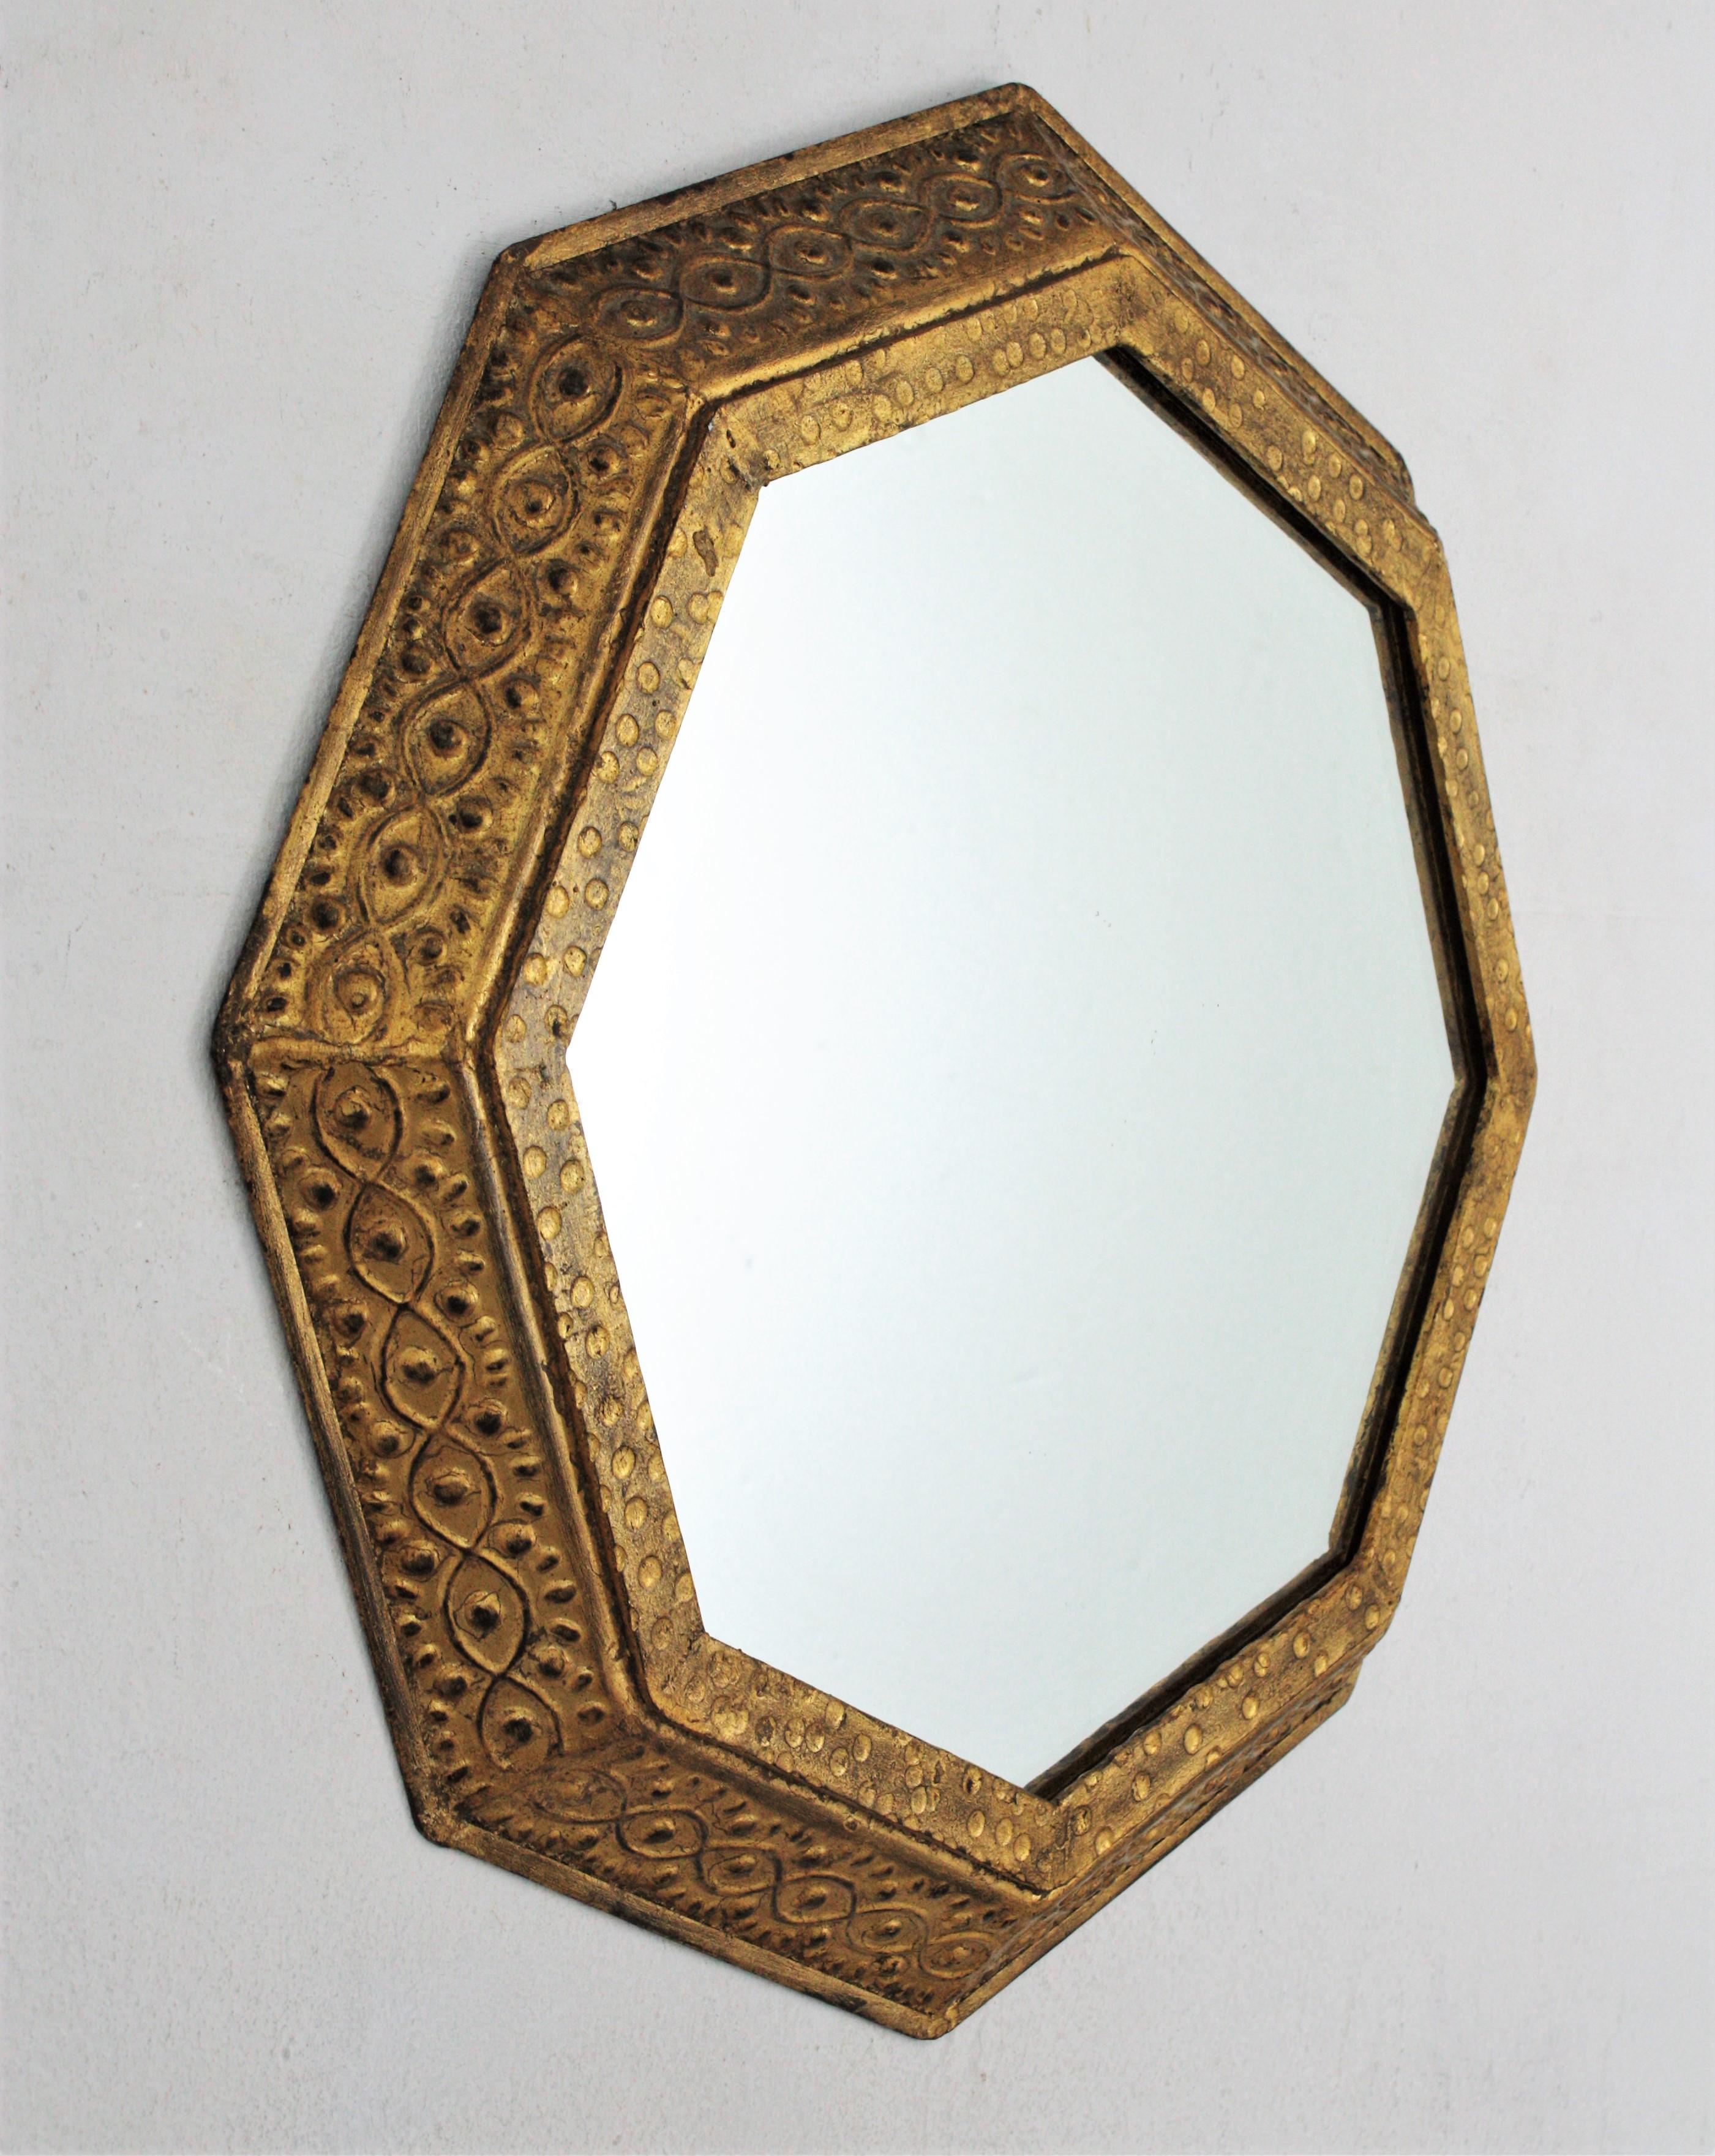 Spanish Octagonal Mirror in Repousse Gilt Iron by Ferro Art, 1950s For Sale 1